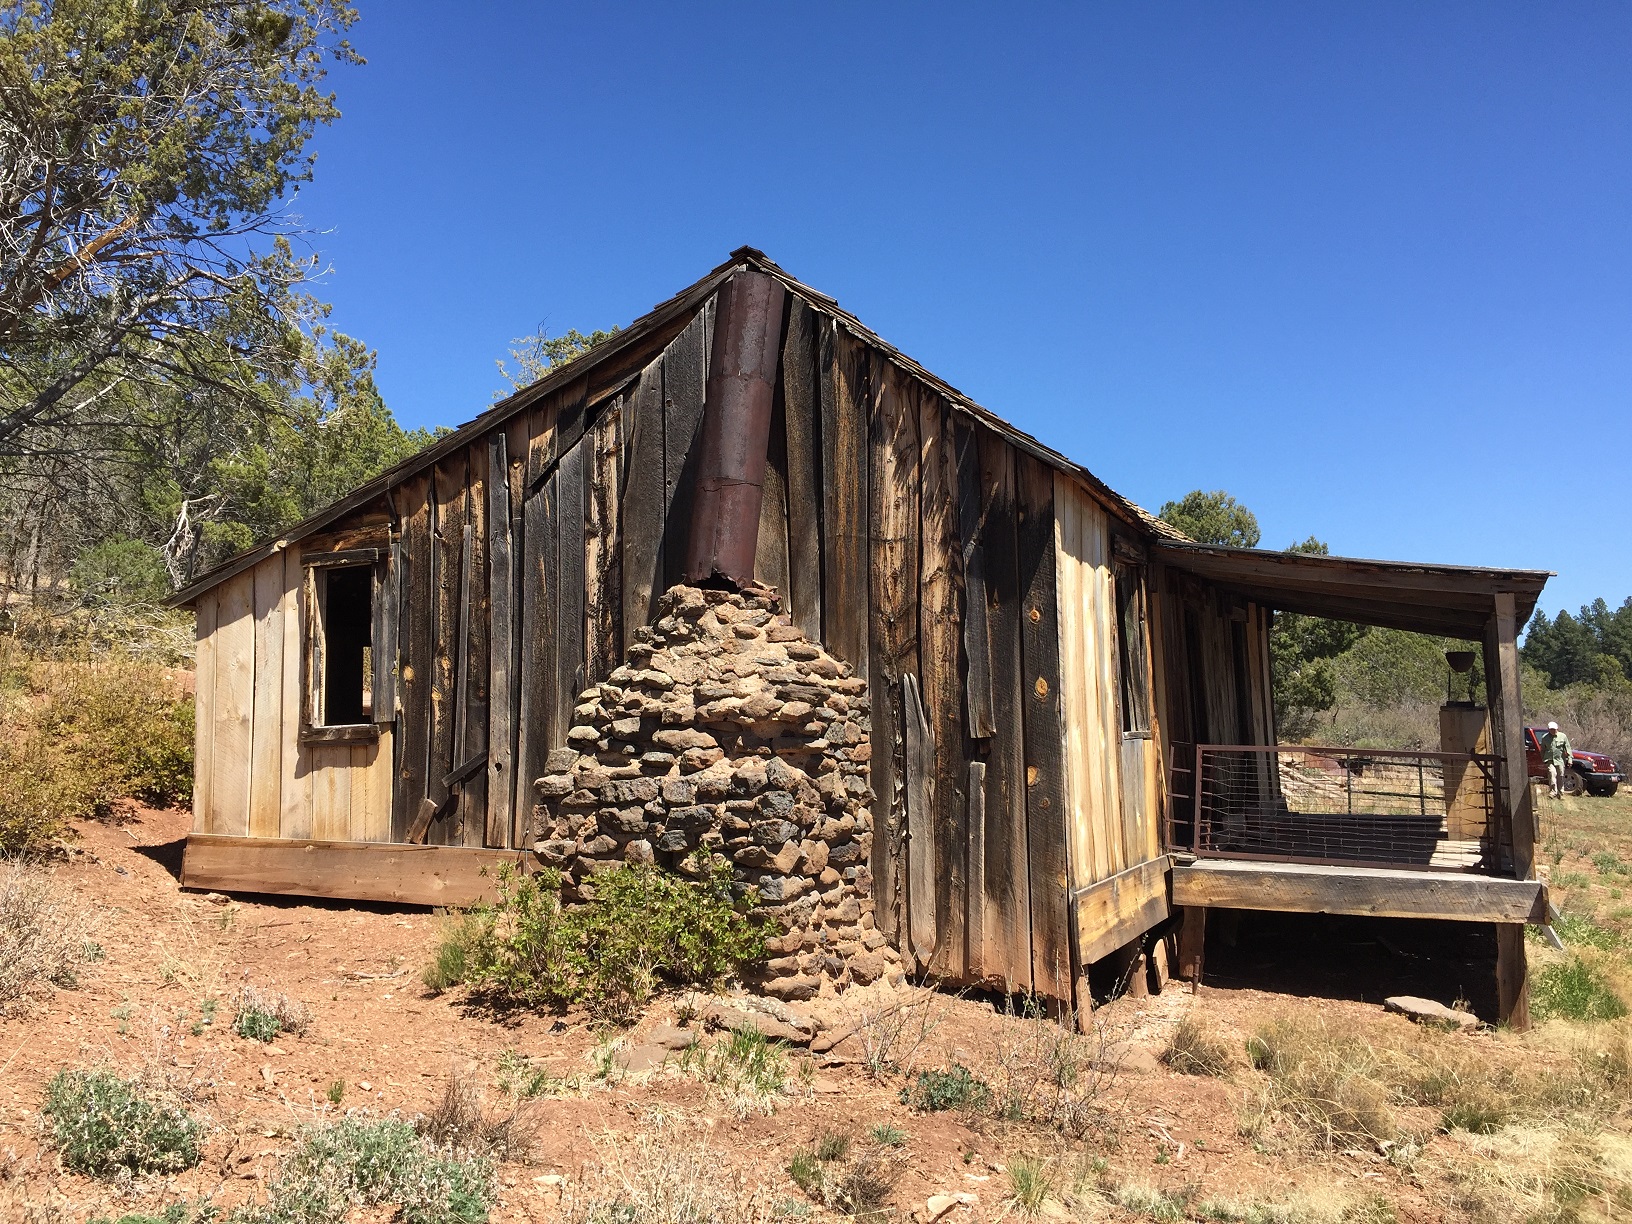 The left side of the Pine Cabin on the Arizona Strip